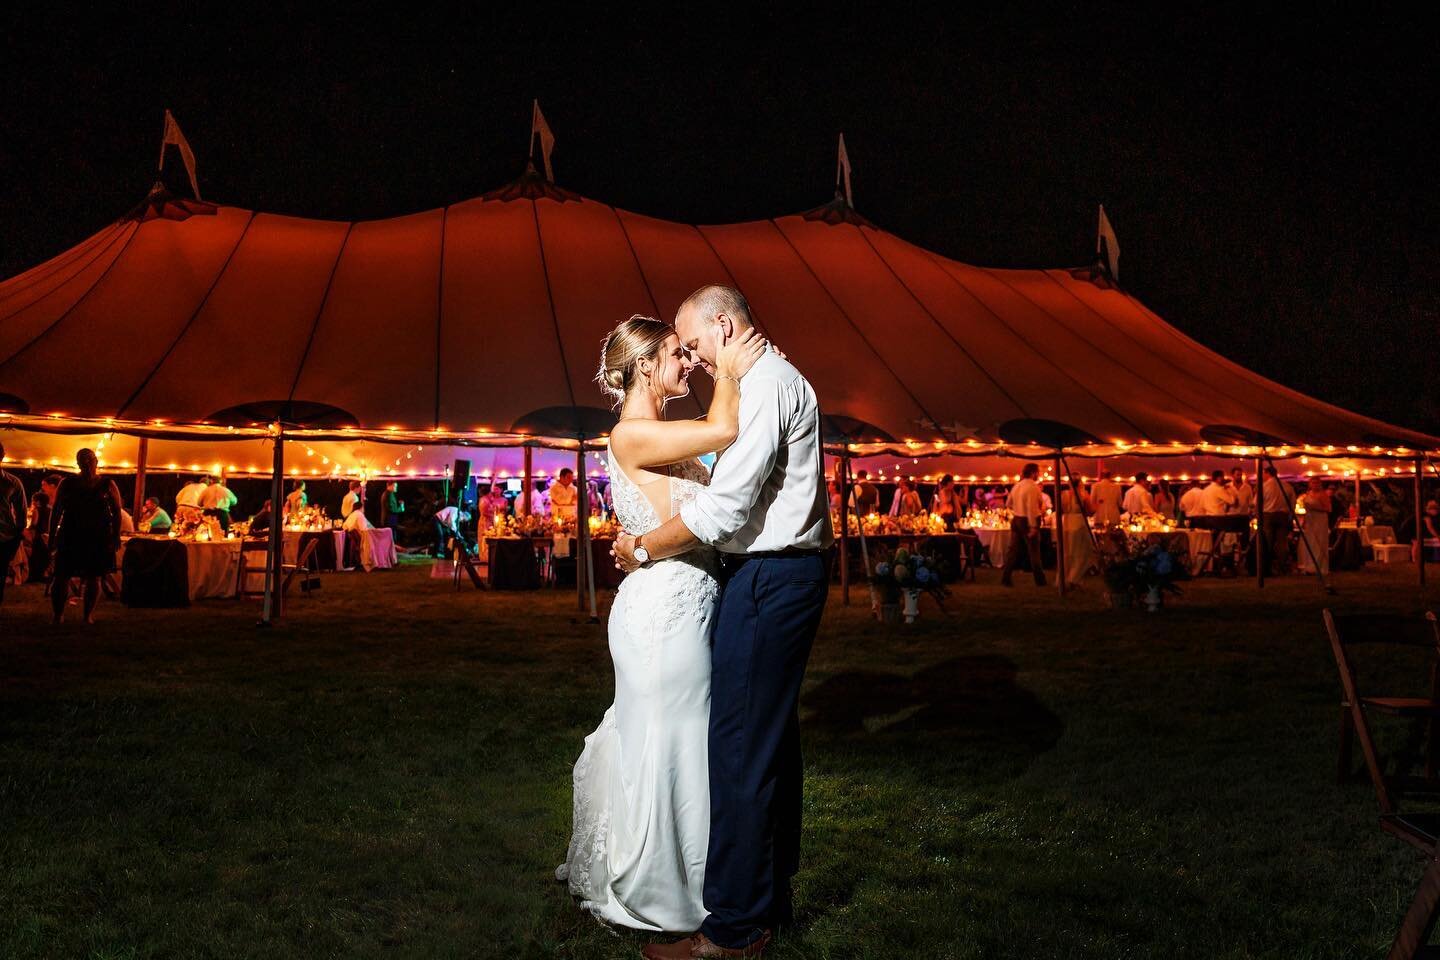 Still catching up on posts from a busy September. I just had to post one of my signature night photos. When you have a beautiful outdoor wedding, you have to capture the tent!